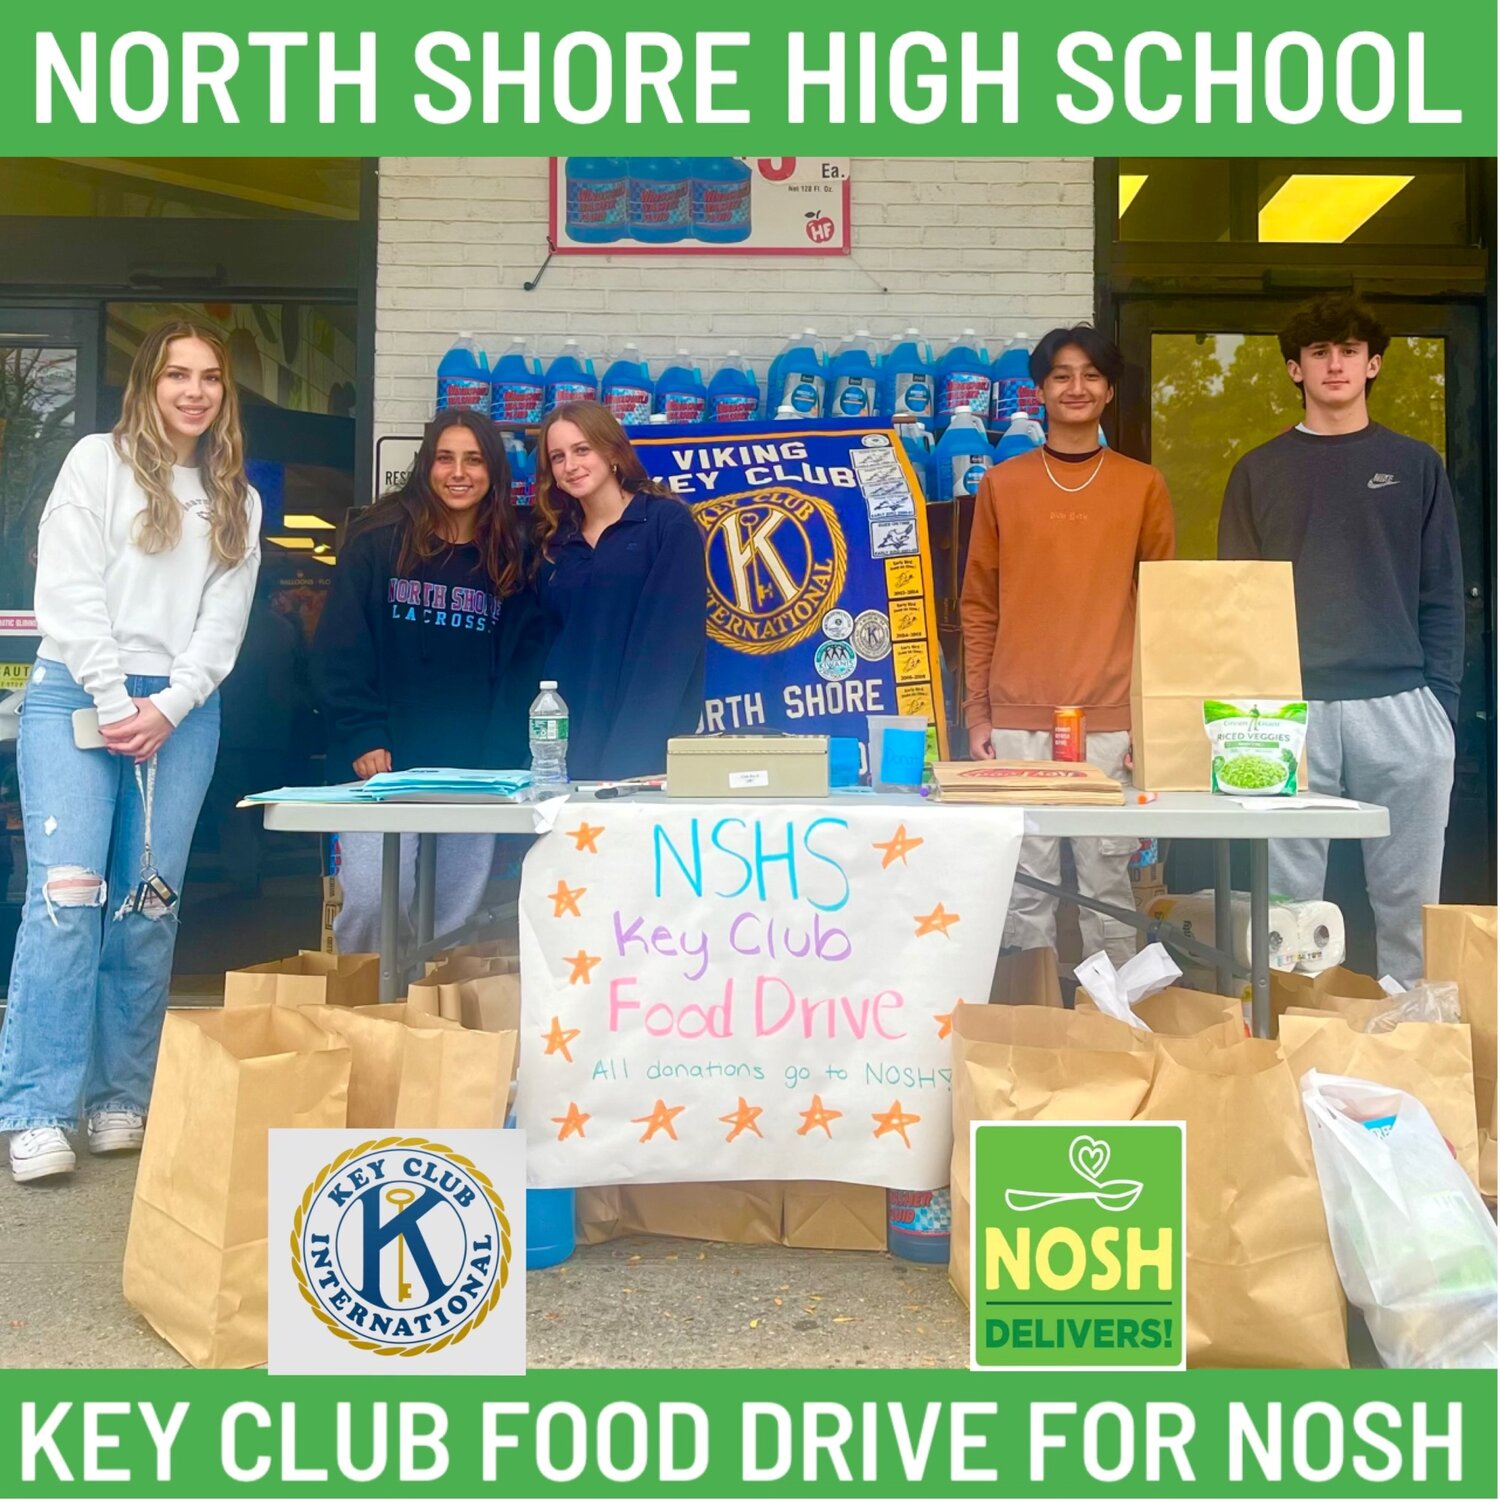 North Shore High School Key Club members Jess Leonard, left, Rebecca Grossman, Sophia Martini, Chone Iannel and Matt Grossman helped promote awareness for NOSH and collected $200 in donations.